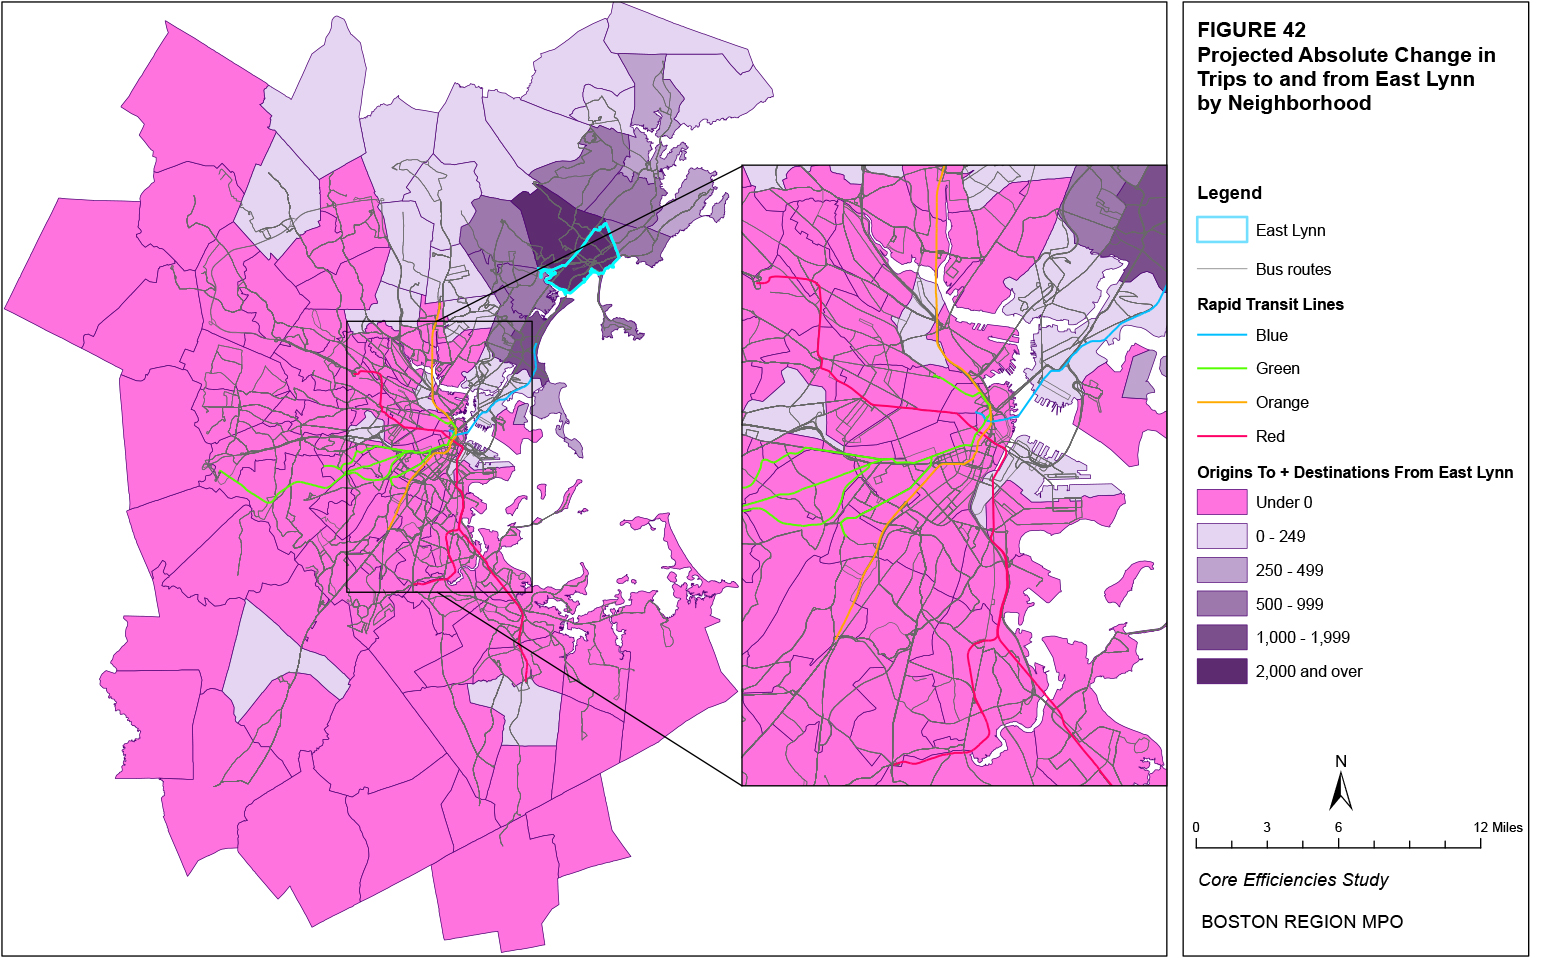 This map shows the projected absolute change in trips to and from the East Lynn neighborhood by neighborhood.